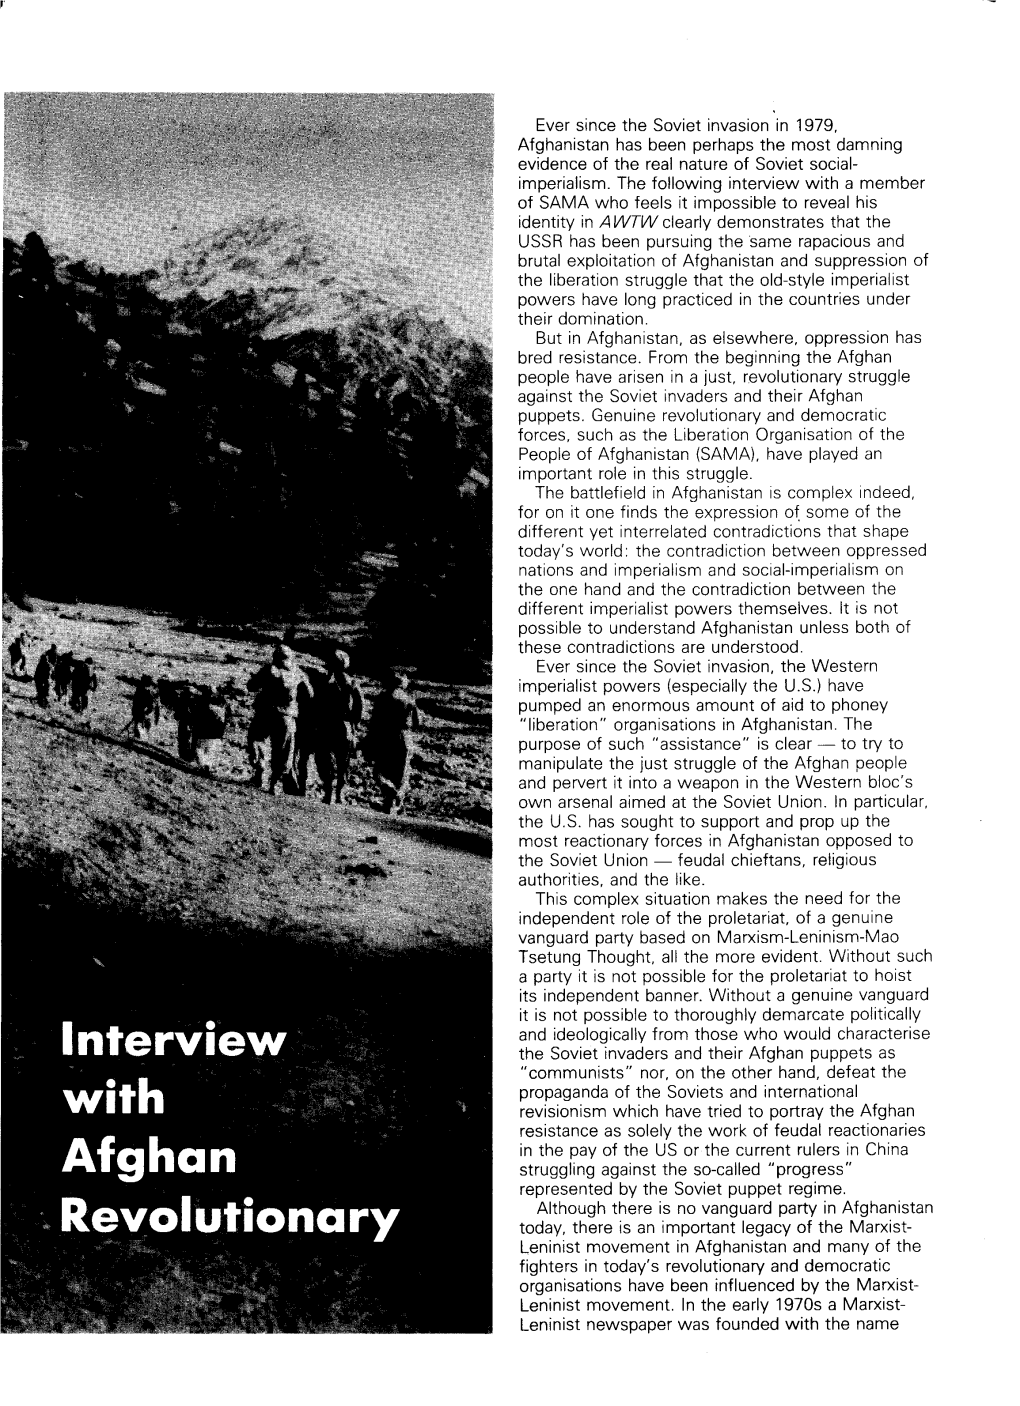 Interview with Afghan Revolutionary